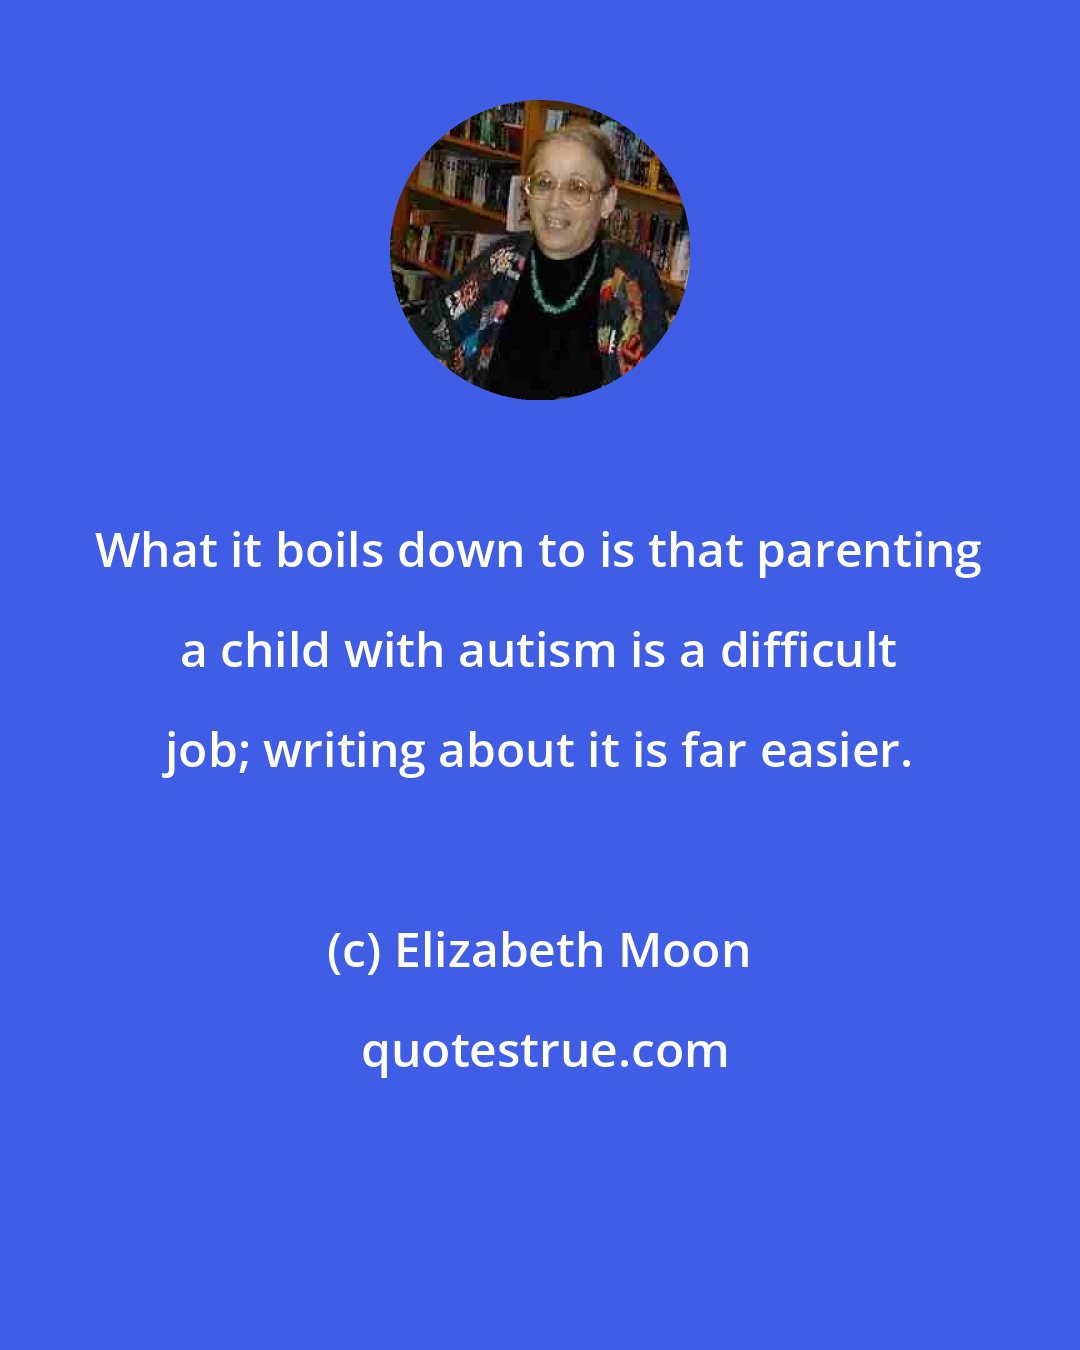 Elizabeth Moon: What it boils down to is that parenting a child with autism is a difficult job; writing about it is far easier.